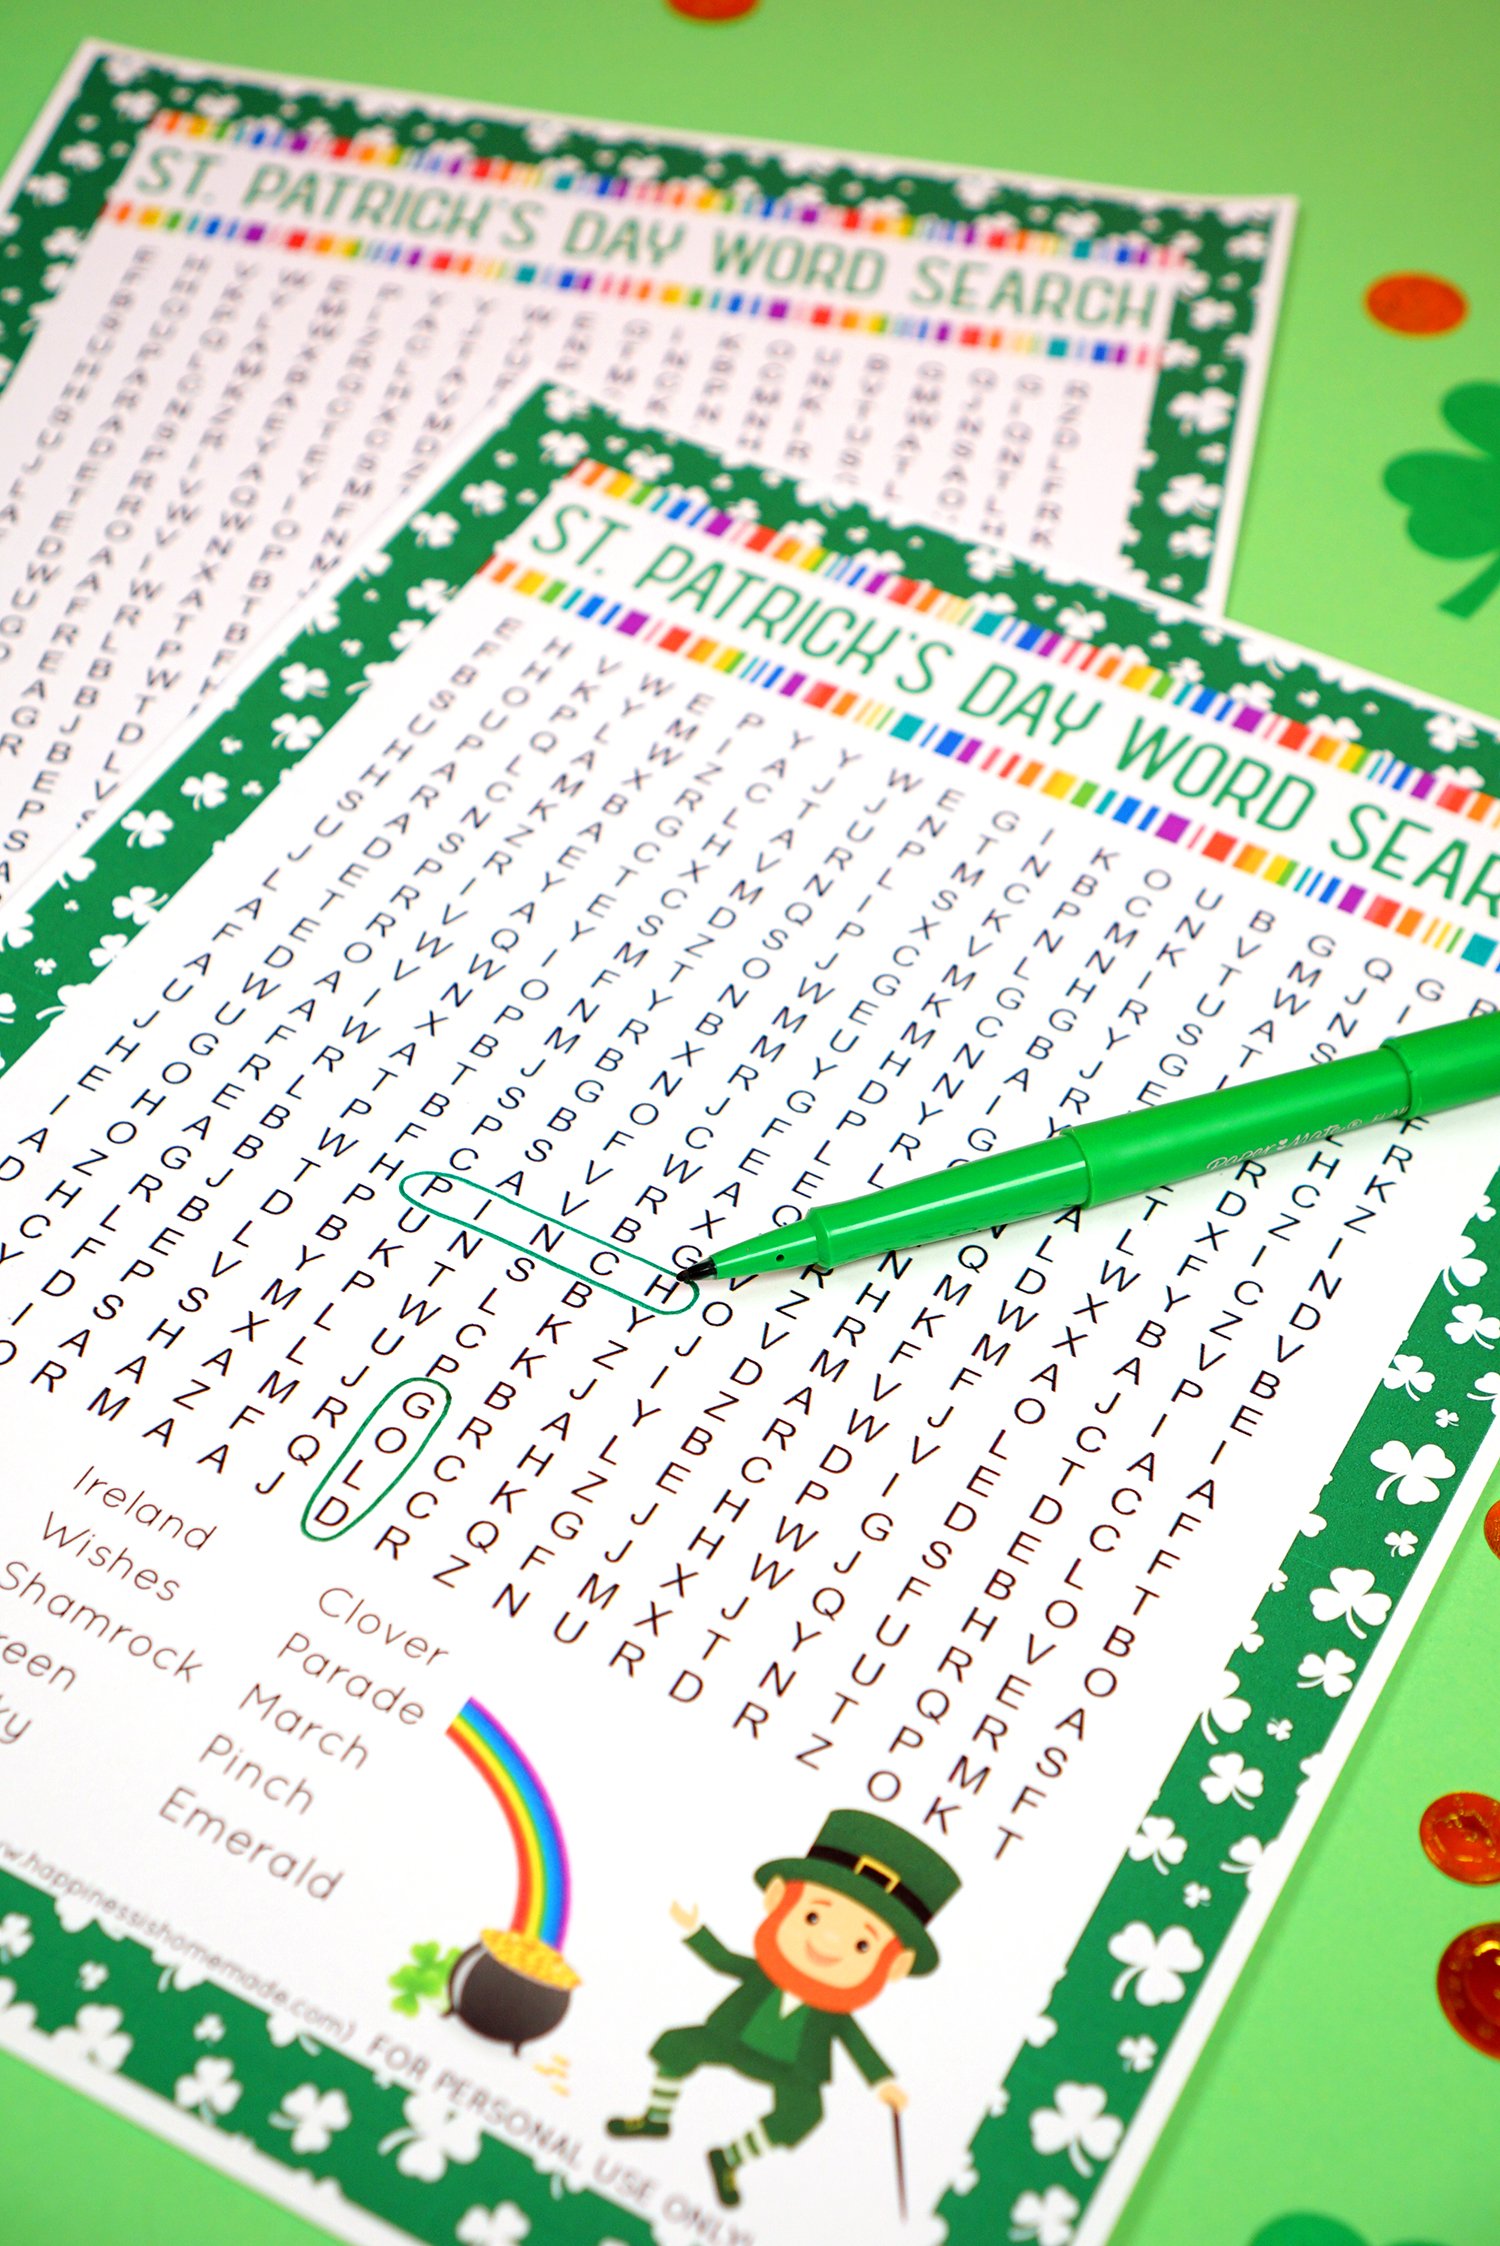 fun printable word search game for st patricks day